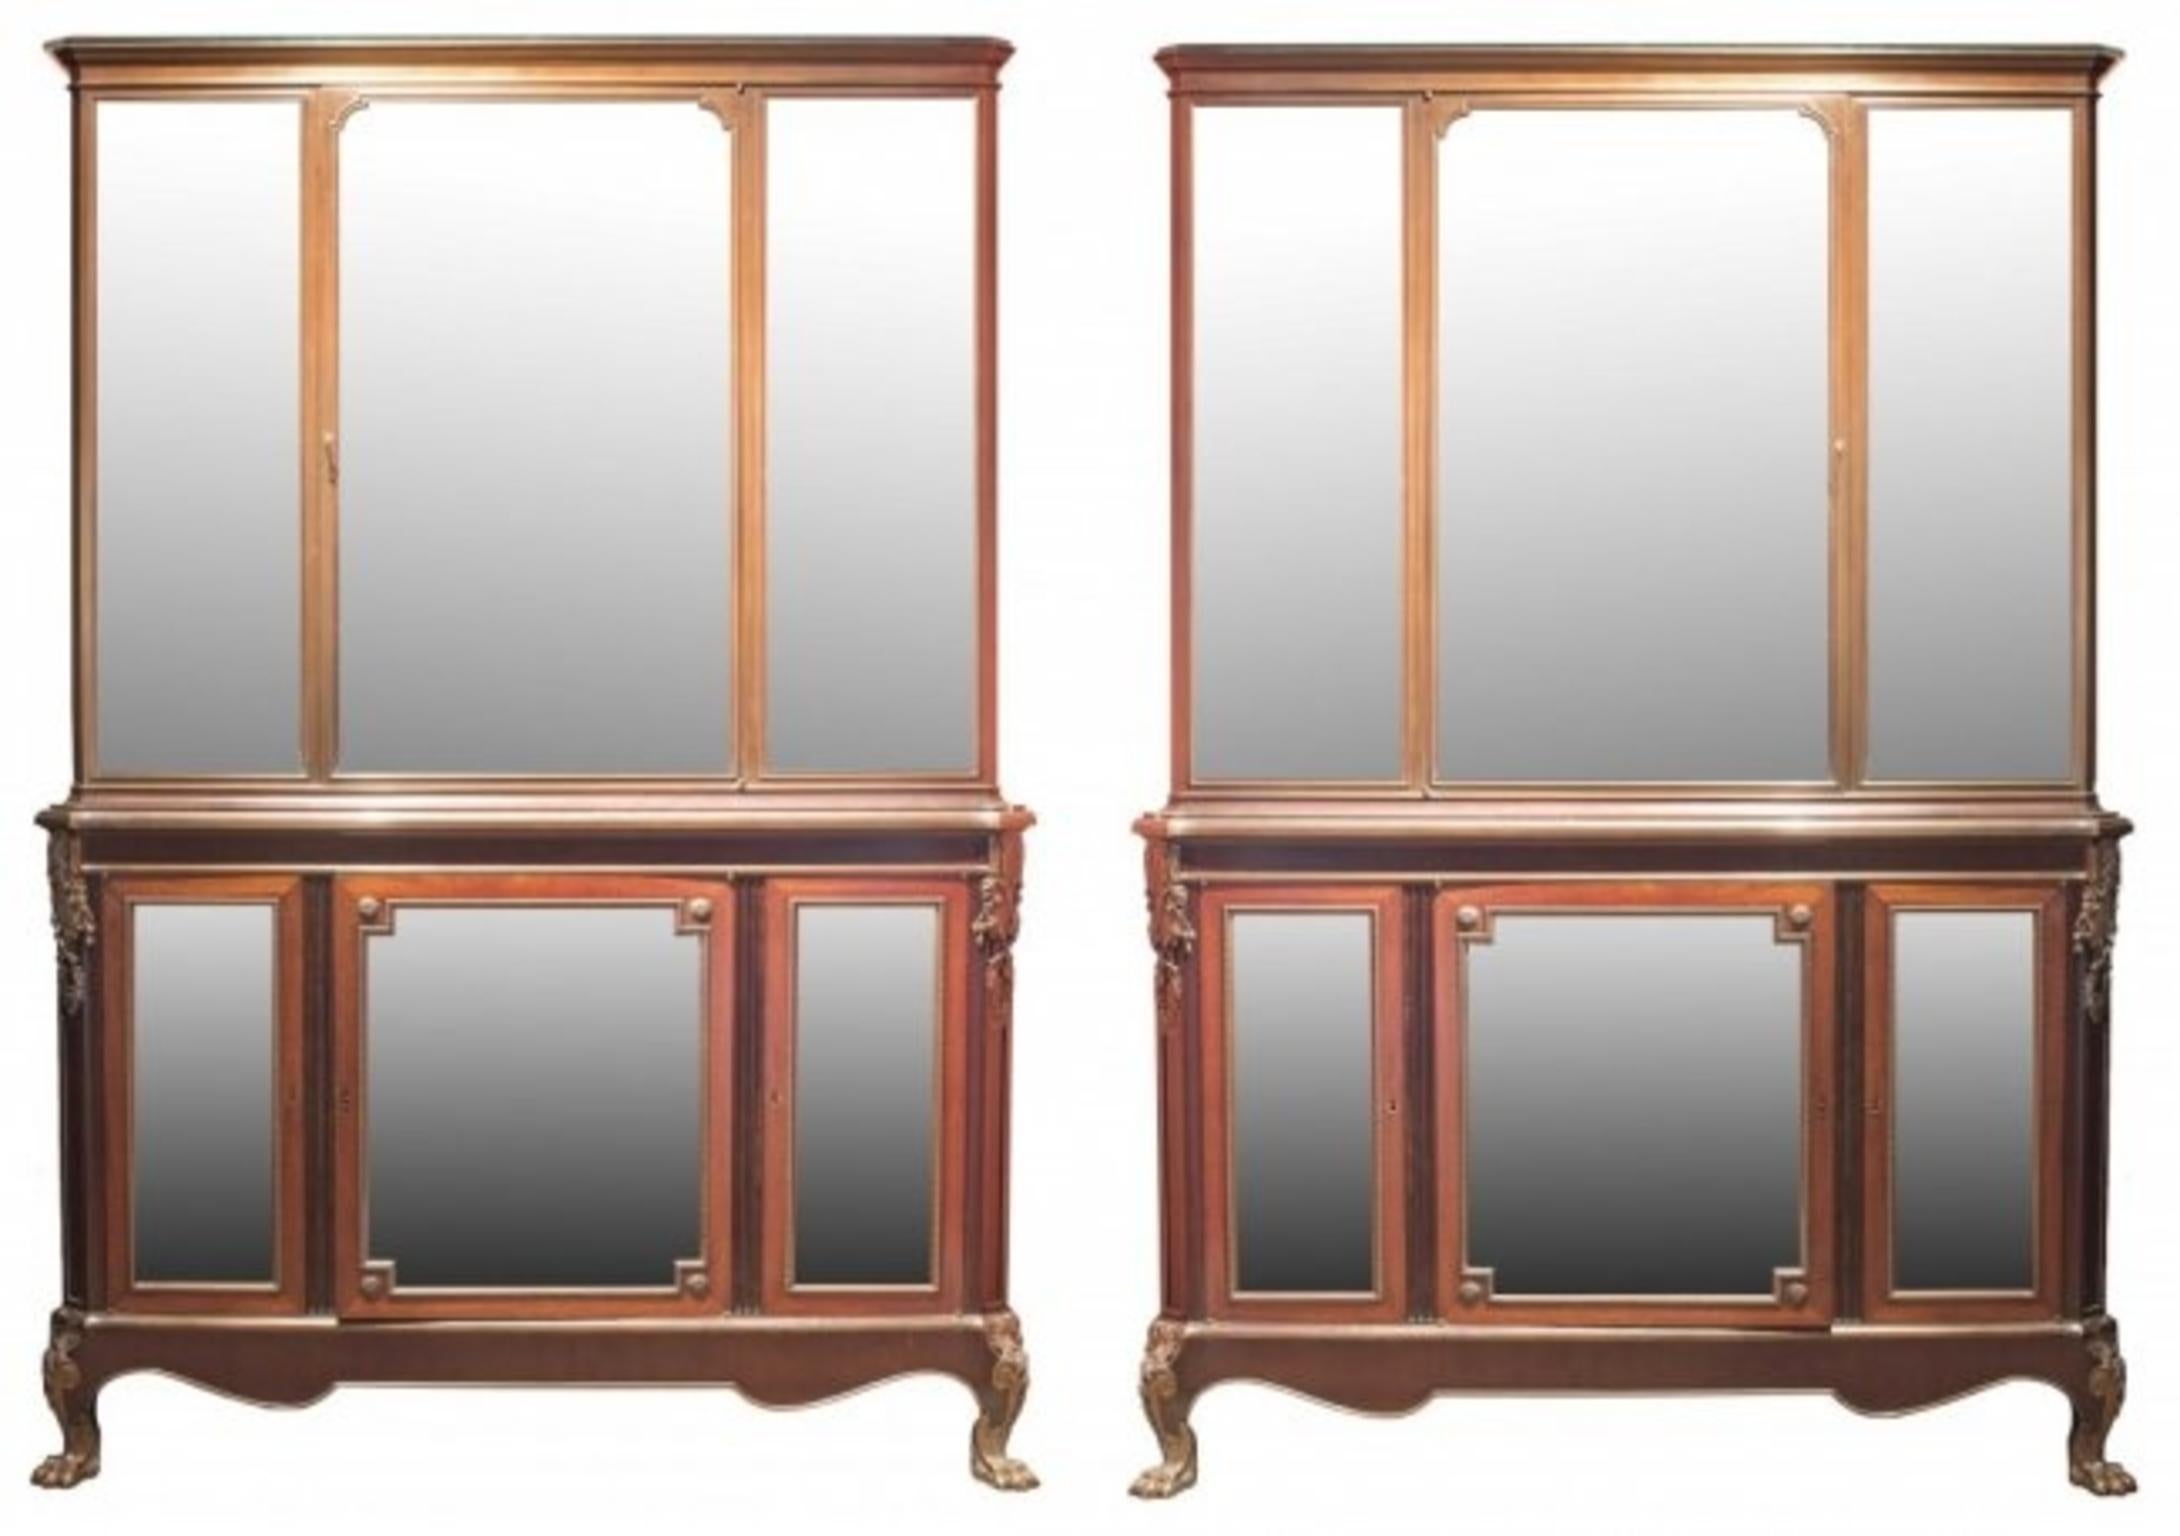 A pair of vitrines, by Henry Dasson, Paris, circa 1889.
Acajou with patinated bronze upper sections, both respectively signed and dated Henry Dasson & Cie, 1889 to the right-hand side molded border, the carcasses stamped HENRY DASSON 1889.